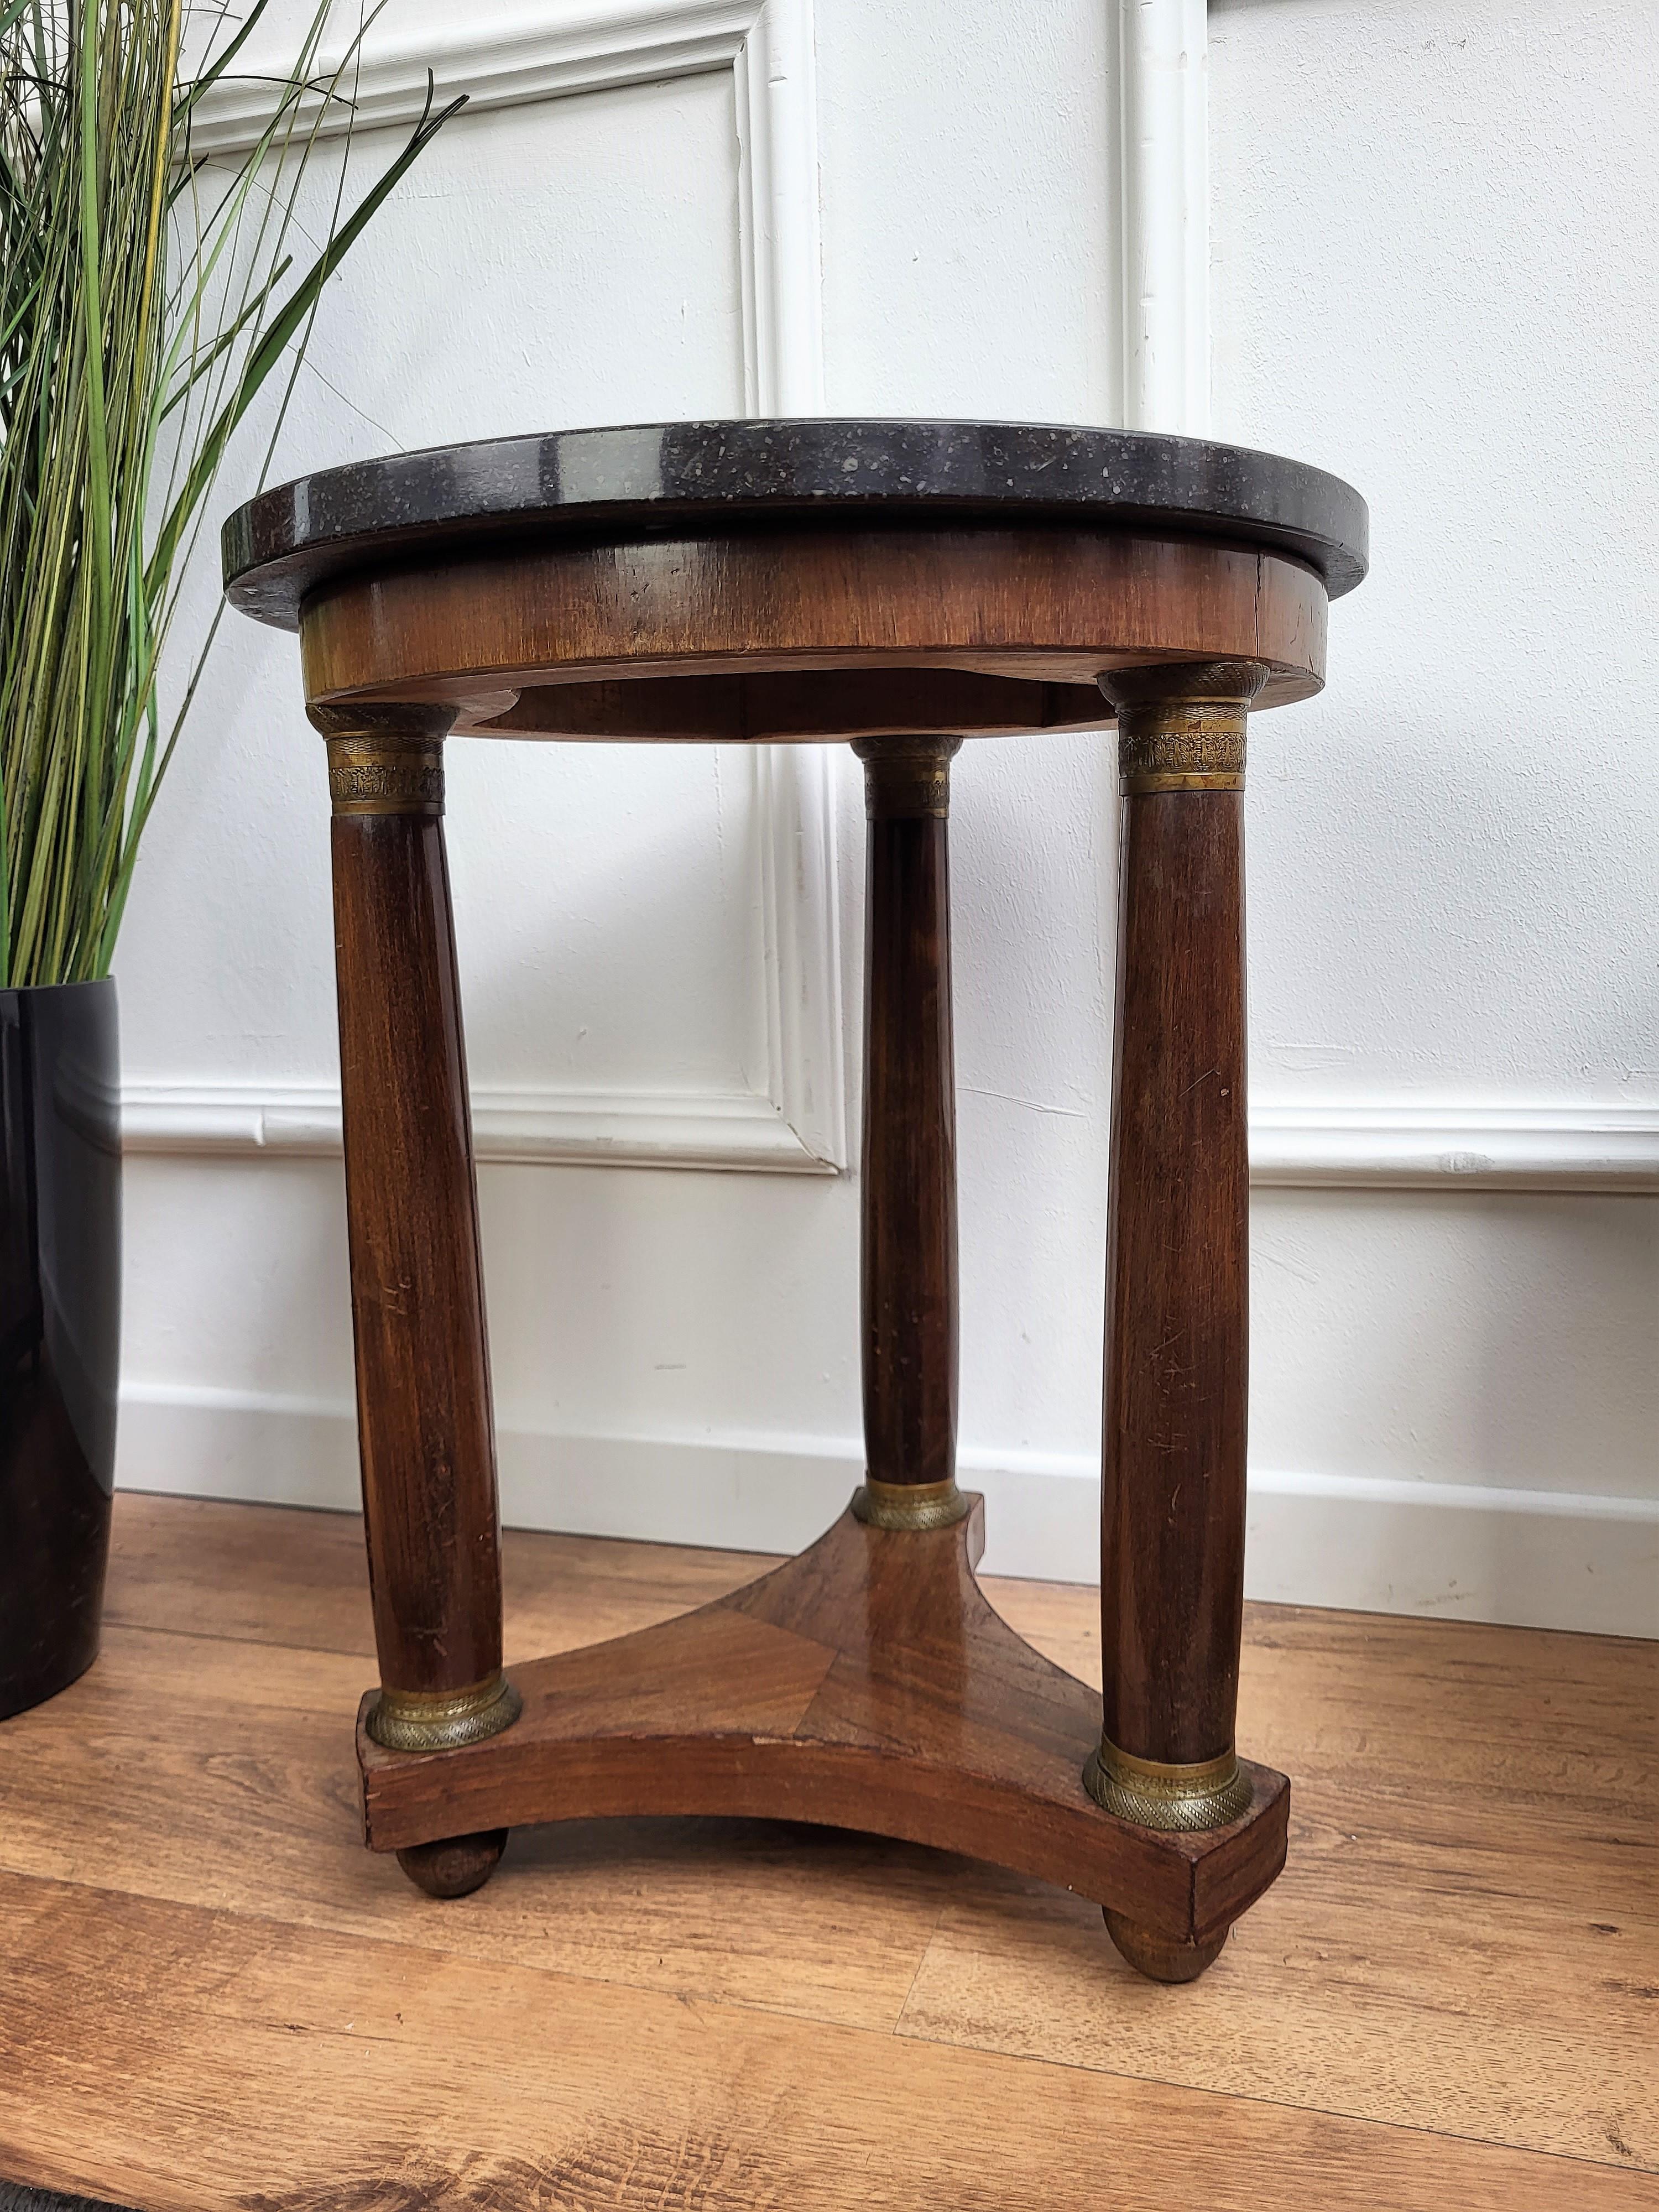 20th Century French Empire Gueridon Side Table with Tripod Columns Brass and Marble Top For Sale